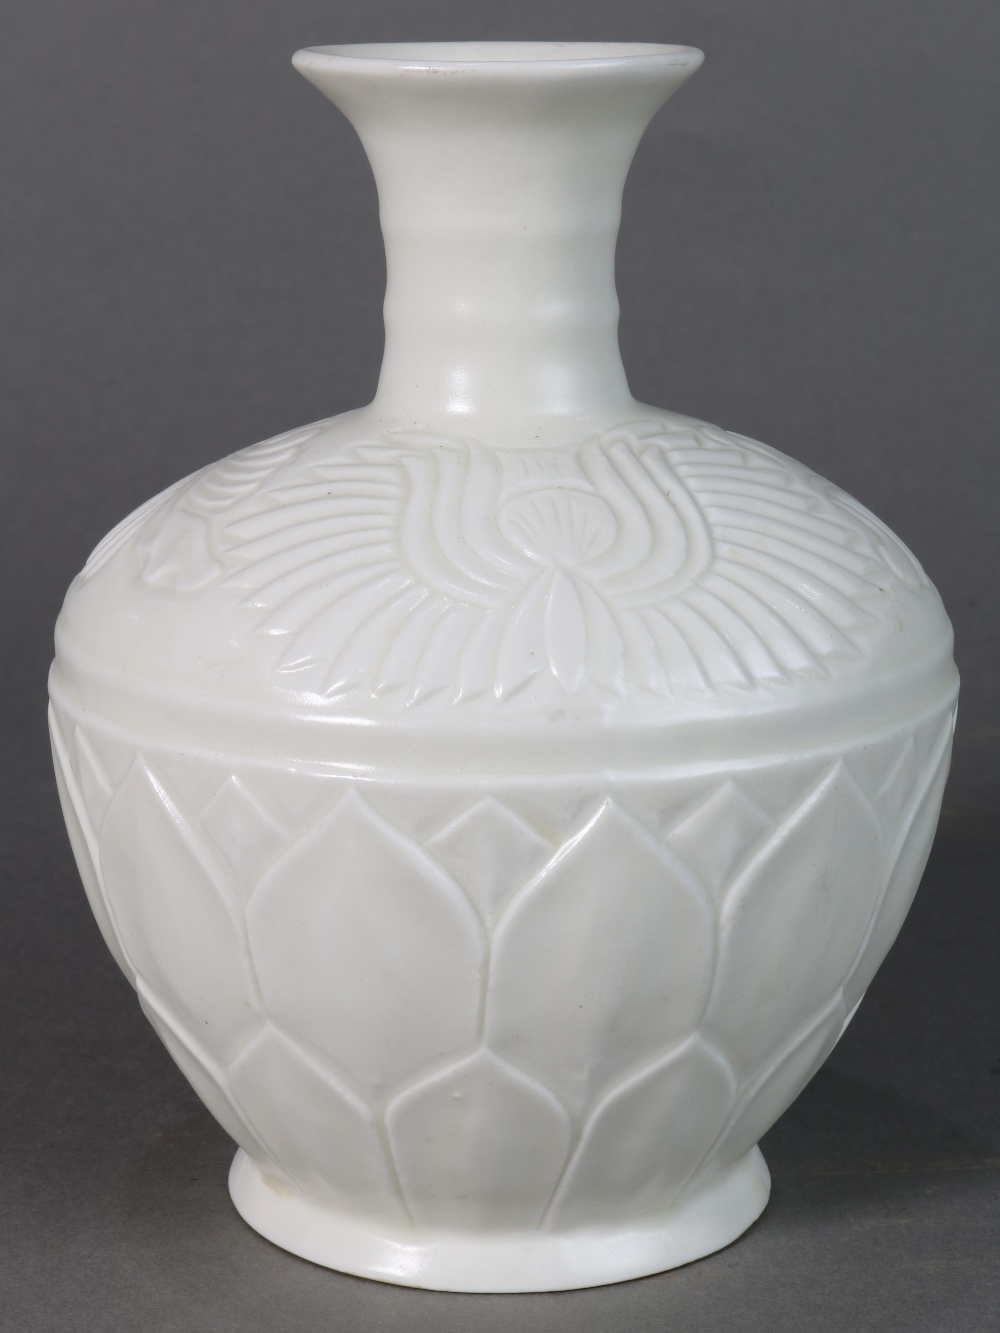 Chinese Ding-type ceramic vase, with a flared neck and a shoulder molded with stylized lotus - Image 2 of 6